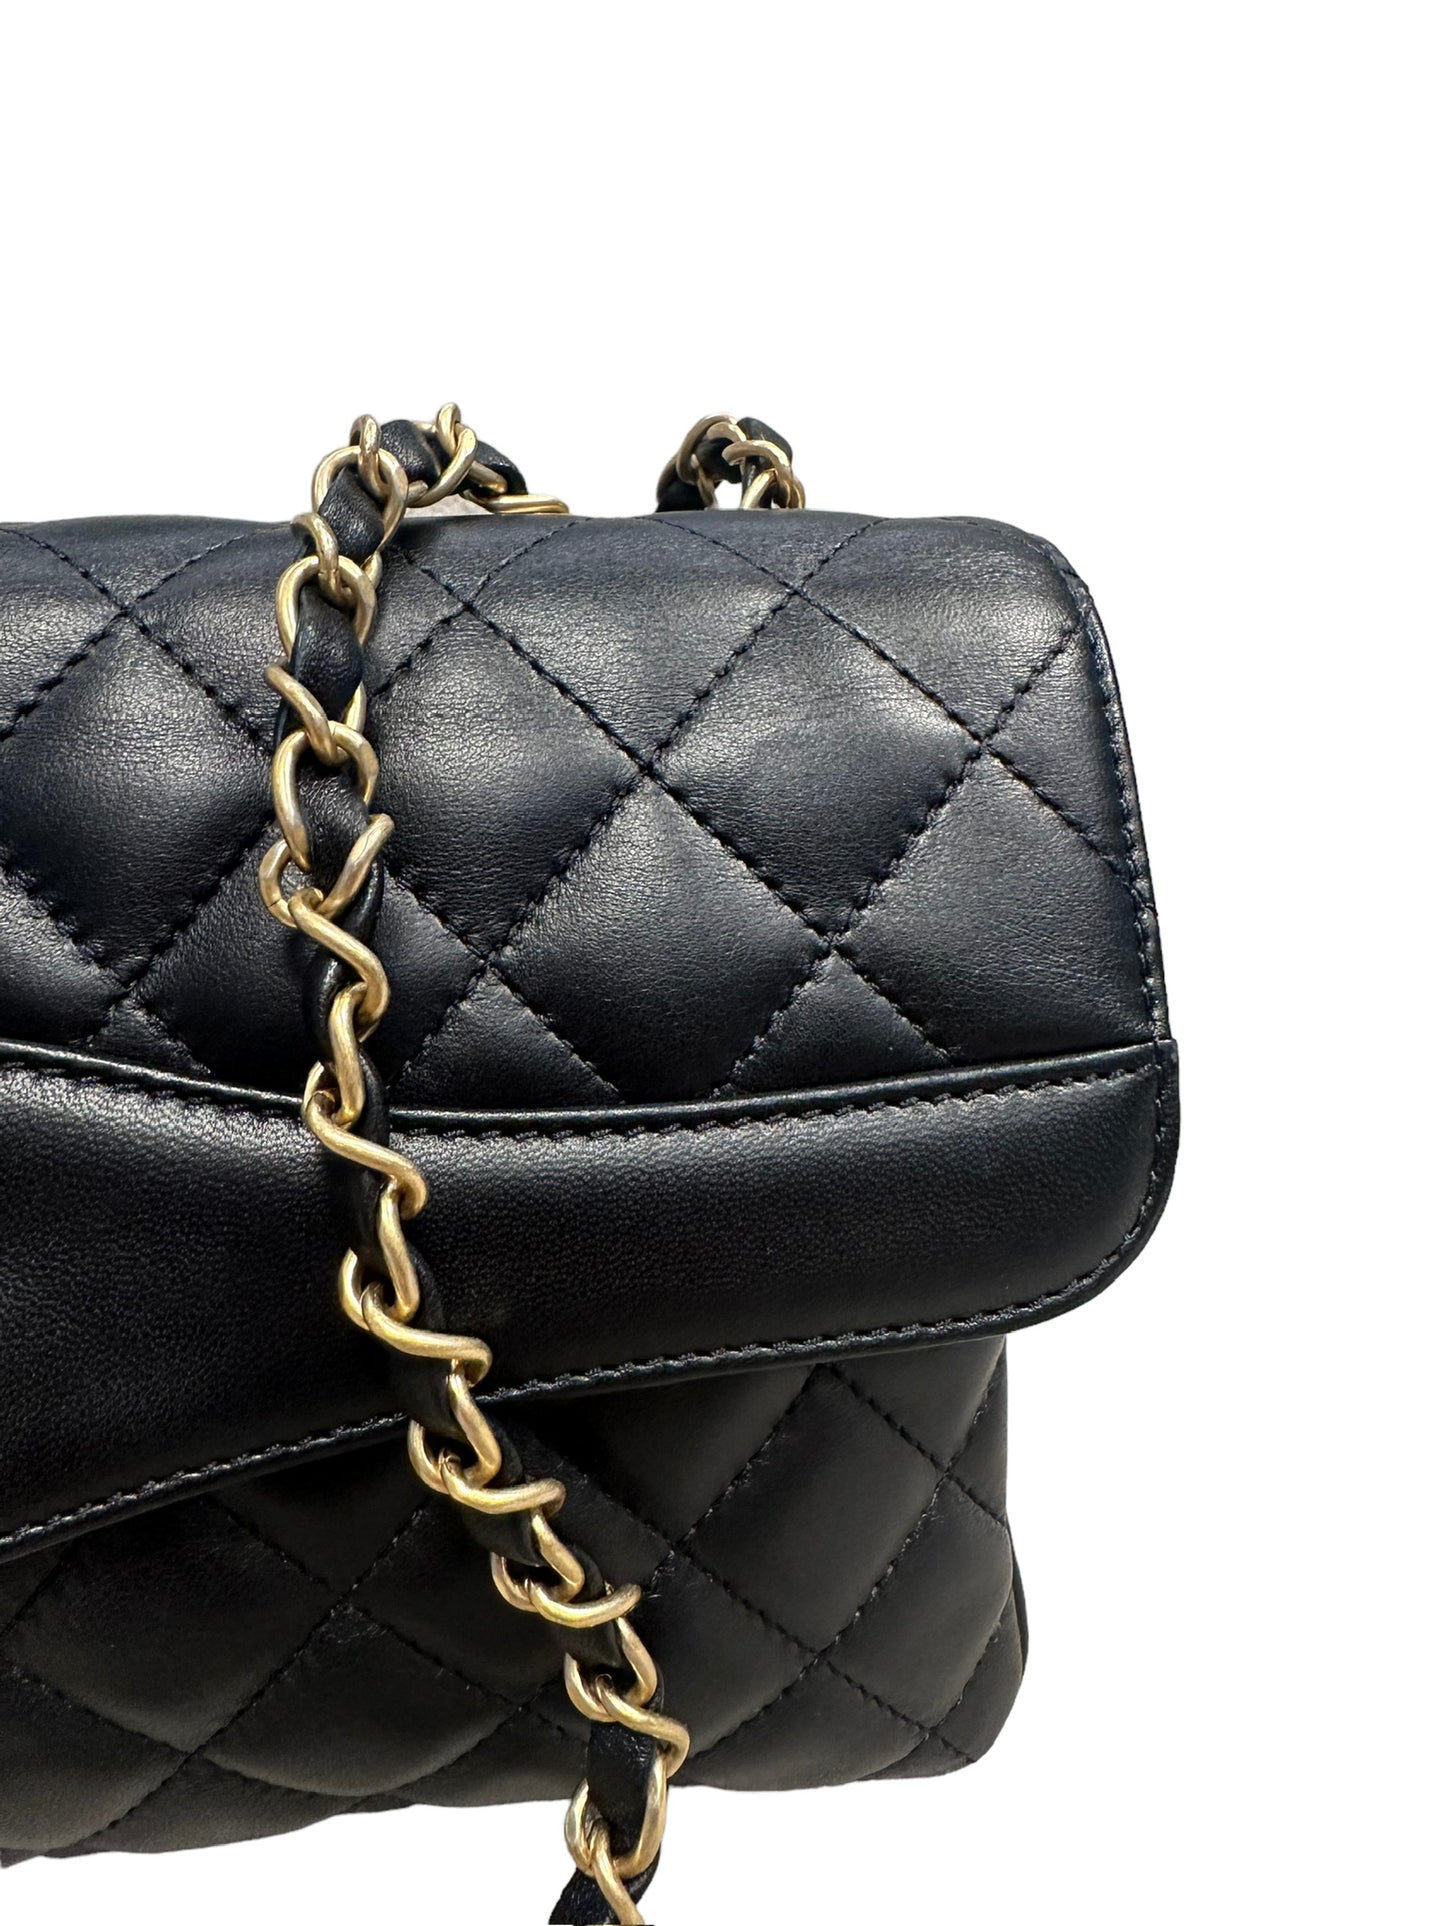 CHANEL - Black Quilted Lambskin Lard Coco Vintage Flap